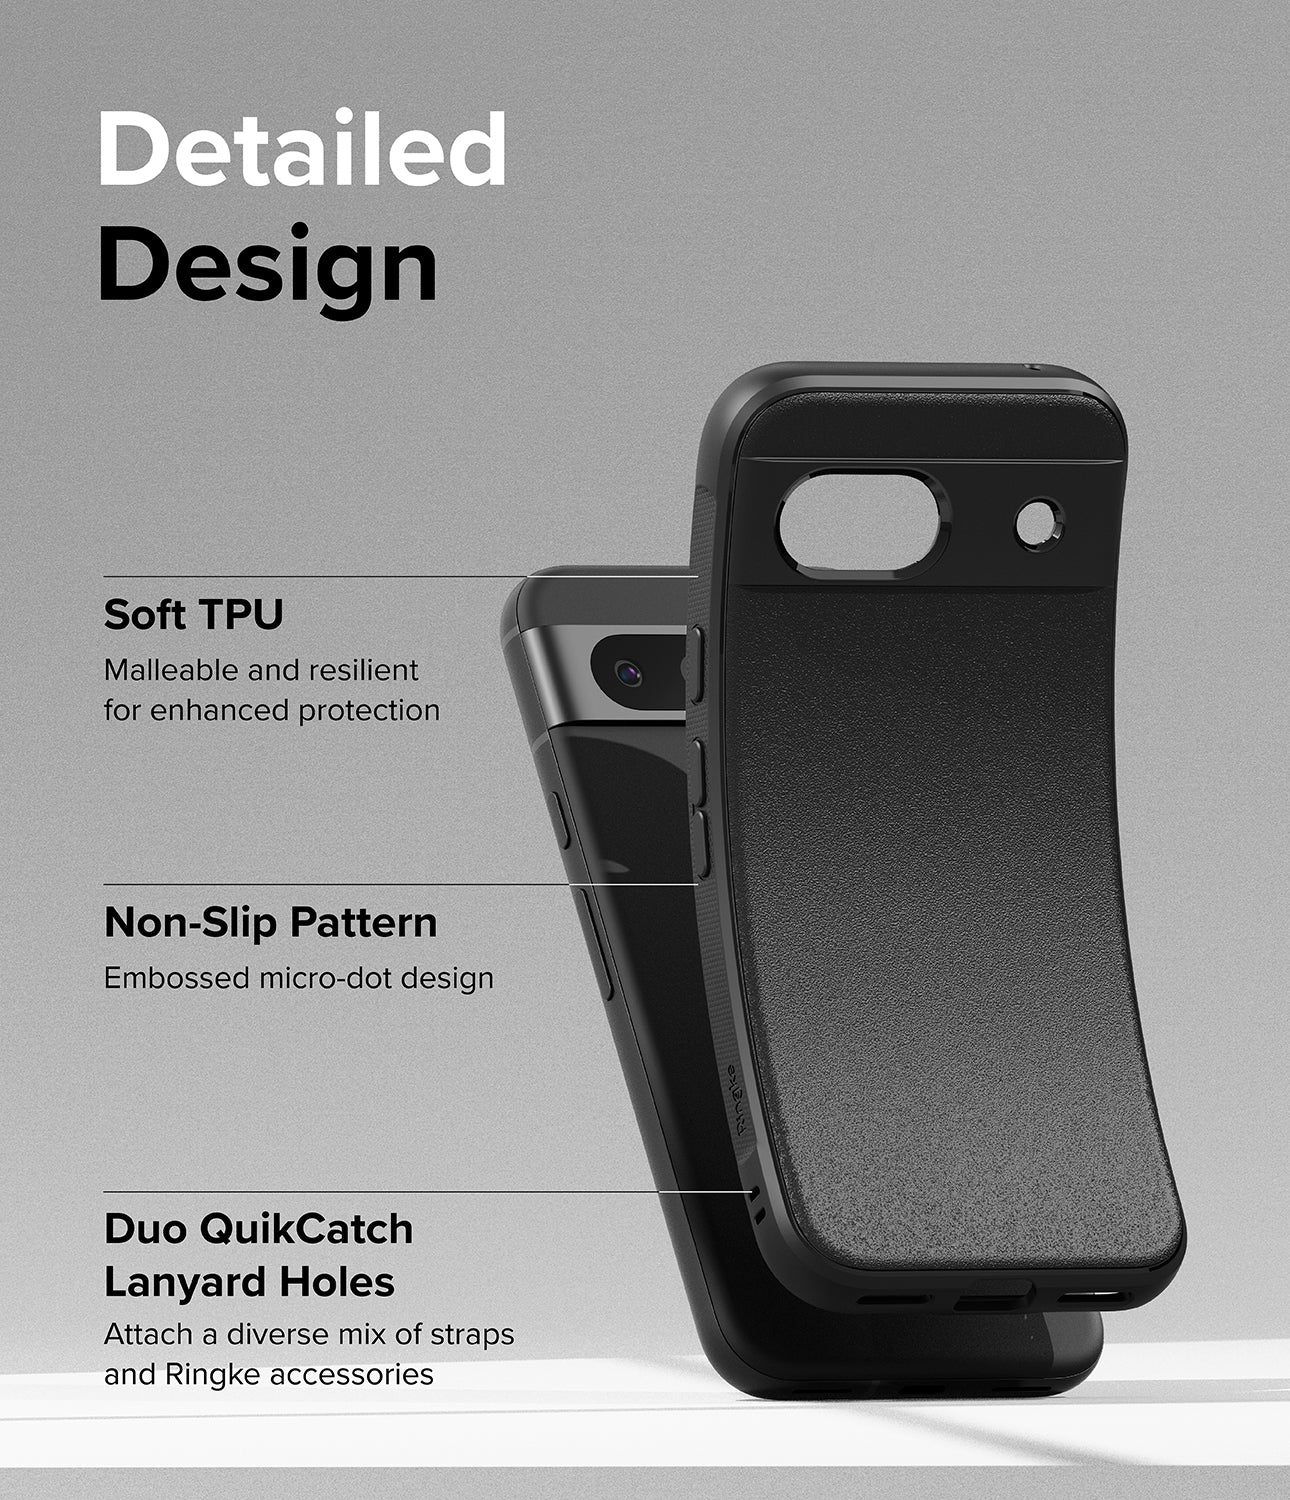 Google Pixel 8a Case | Onyx - Black - Detailed Design. Malleable and resilient for enhanced protection with Soft TPU. Embossed micro-dot design with Non-Slip Pattern. Attach a diverse mix of straps and Ringke accessories with Duo QuikCatch Lanyard Holes.